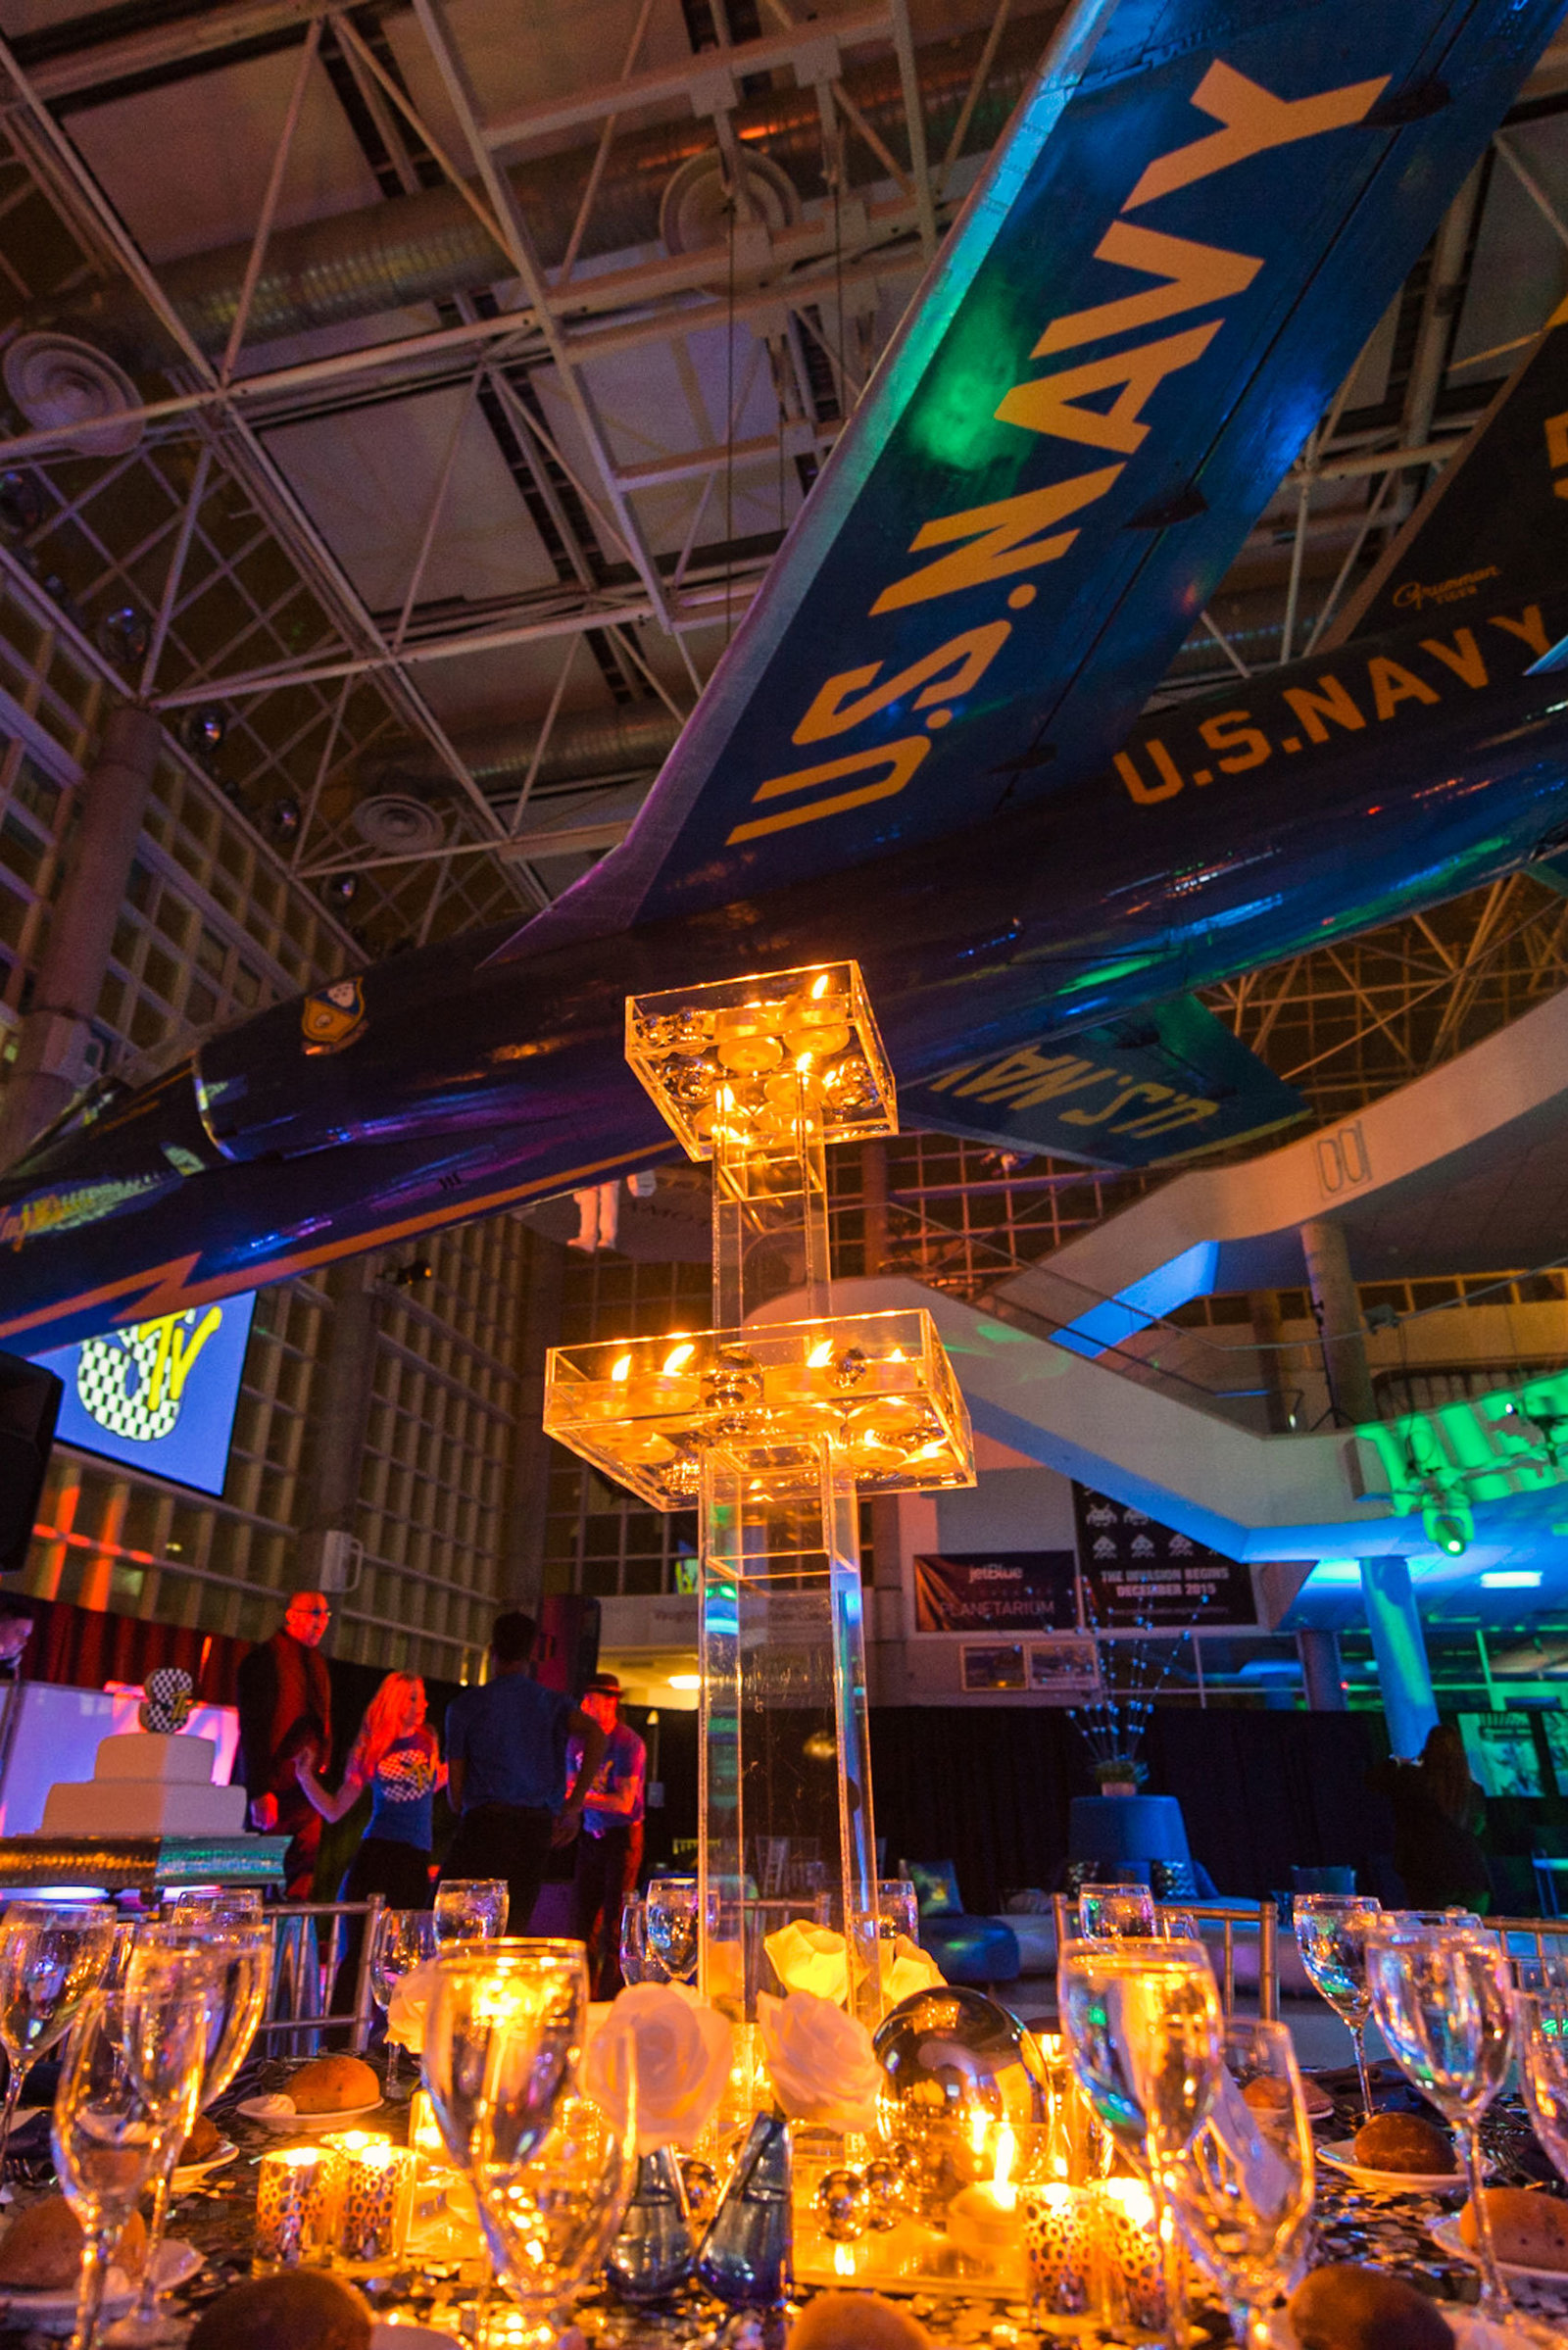 Center piece lit up at Cradle of Aviation